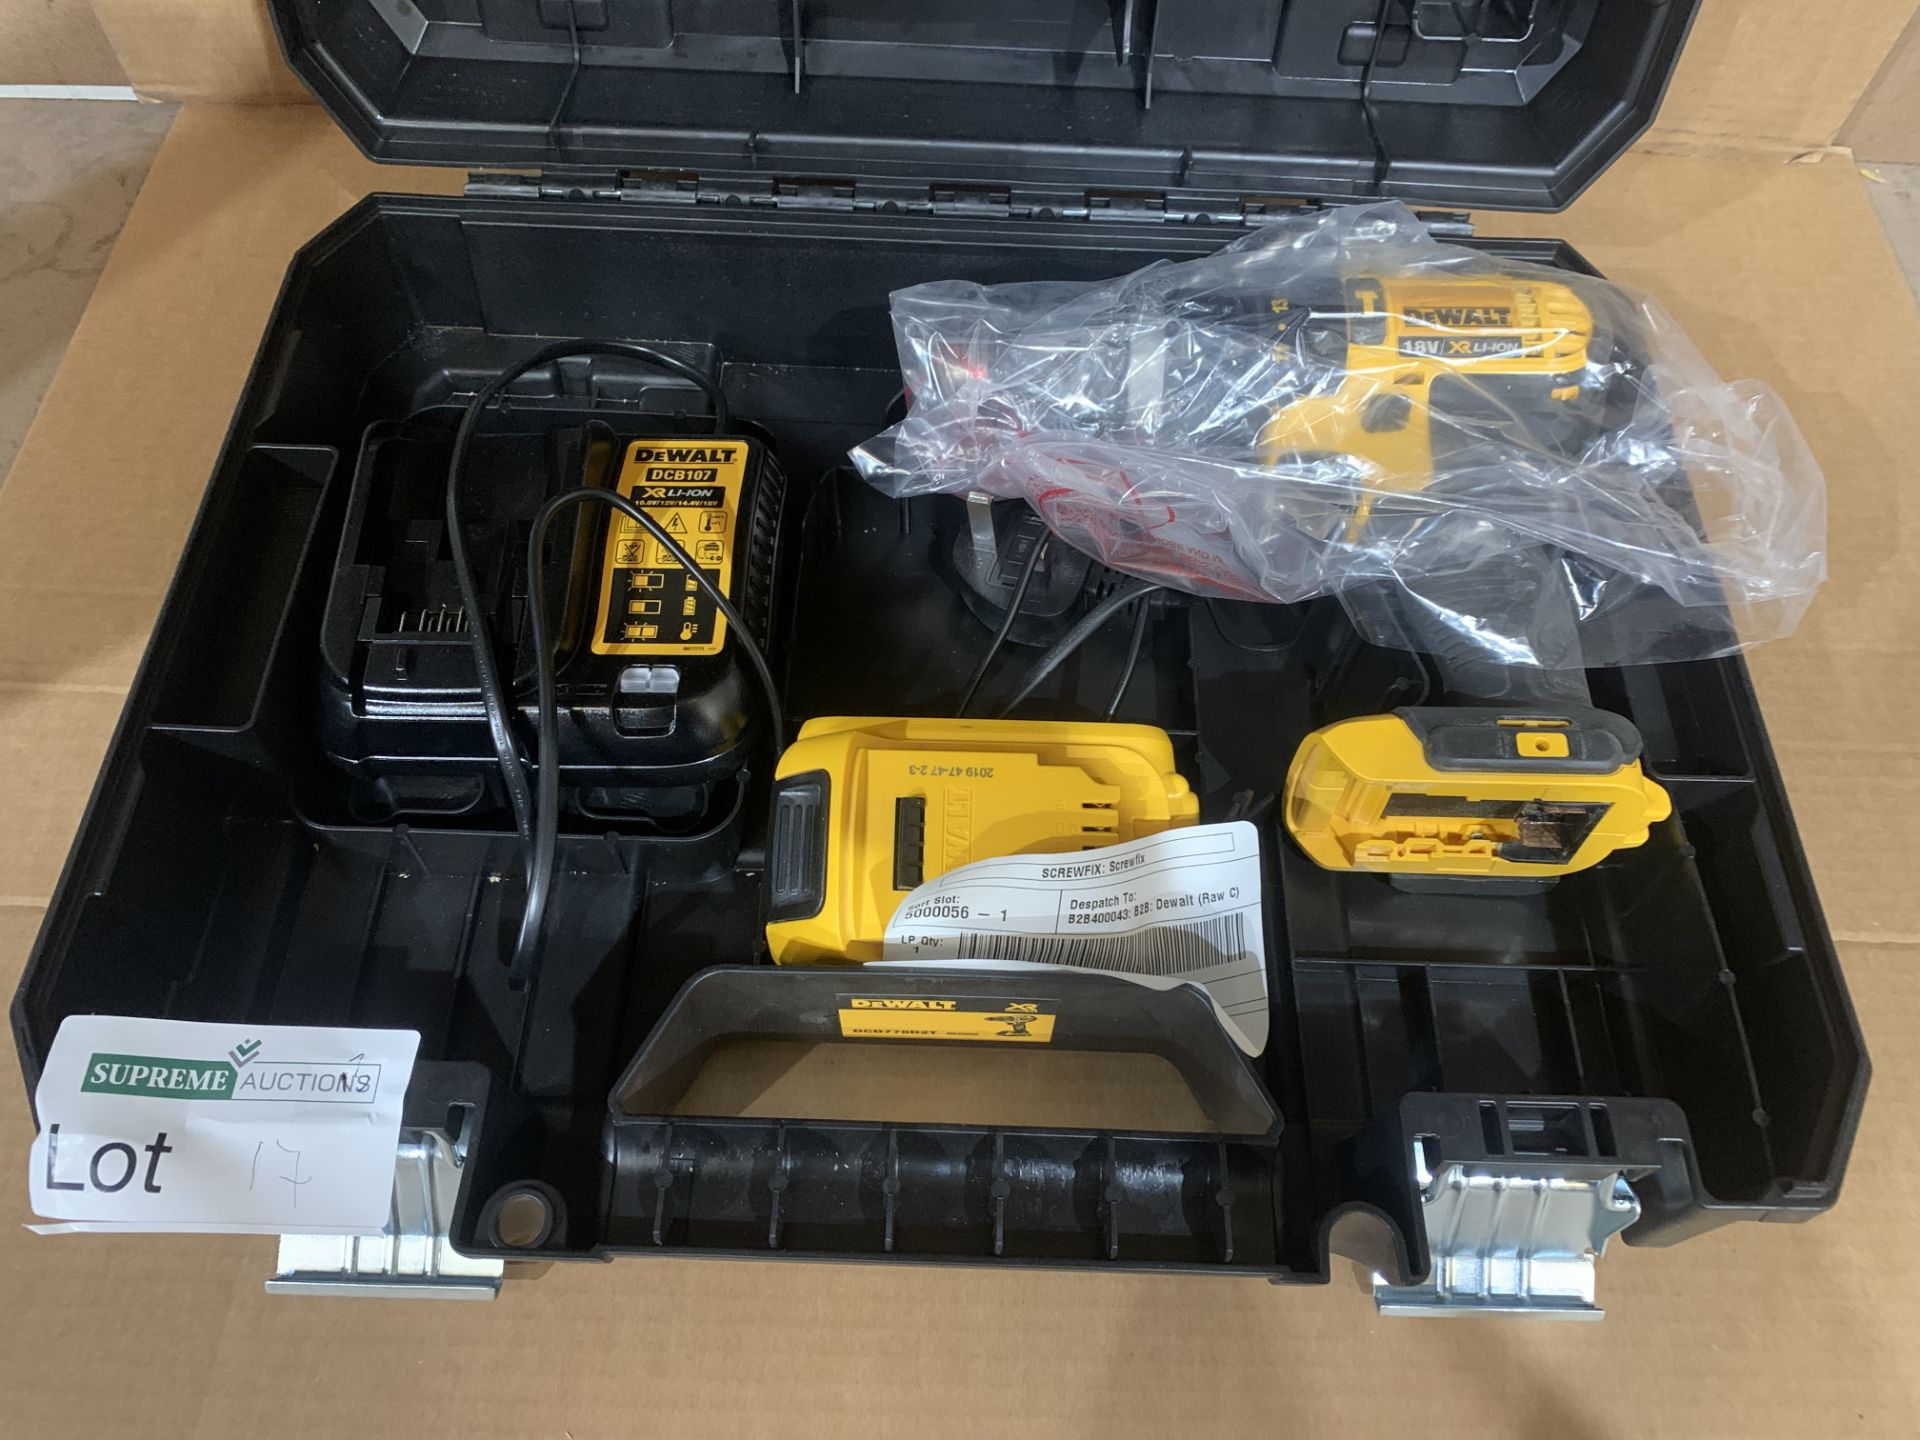 DEWALT DCD778D2T-SFGB 18V 2.0AH LI-ION XR BRUSHLESS CORDLESS COMBI DRILL WITH 1 X BATTERY, CHARGER &